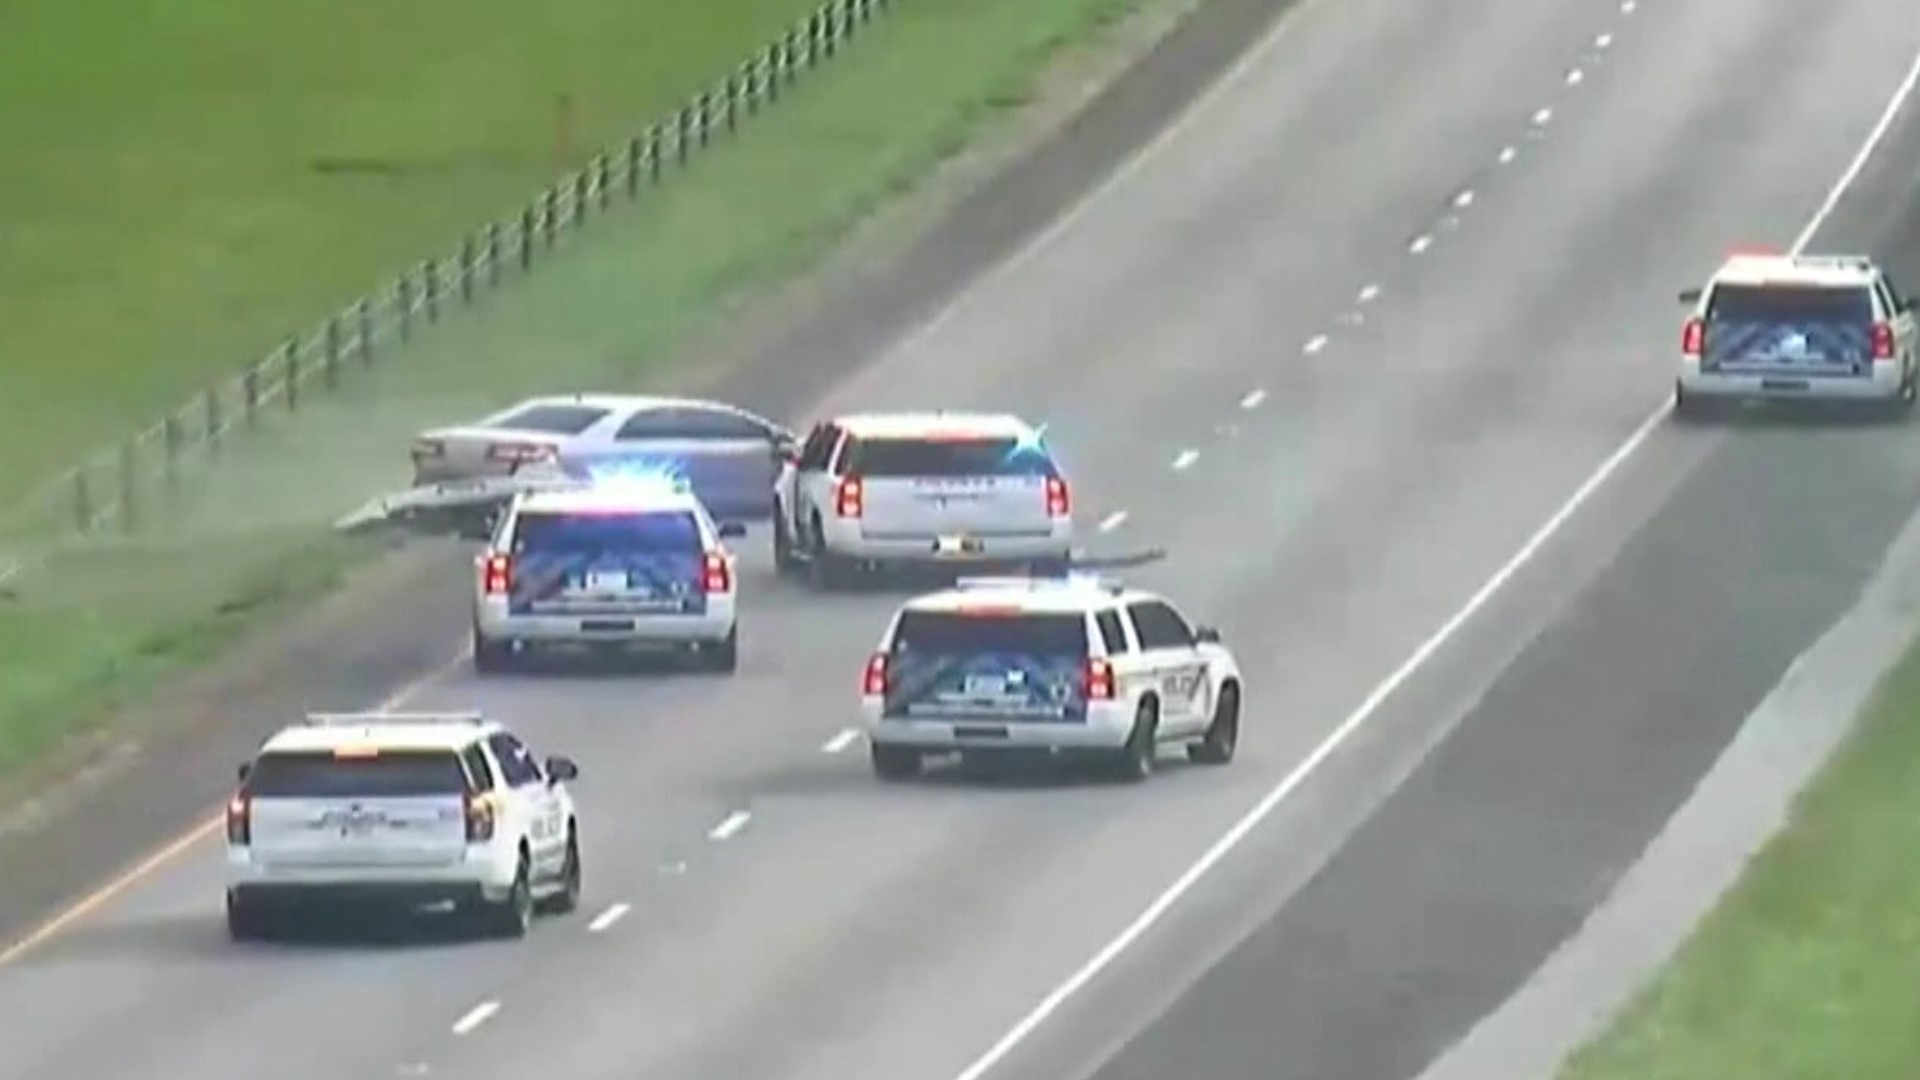 An officer fired shots at the stolen car after it nearly hit him. (Video courtesy: INDOT)